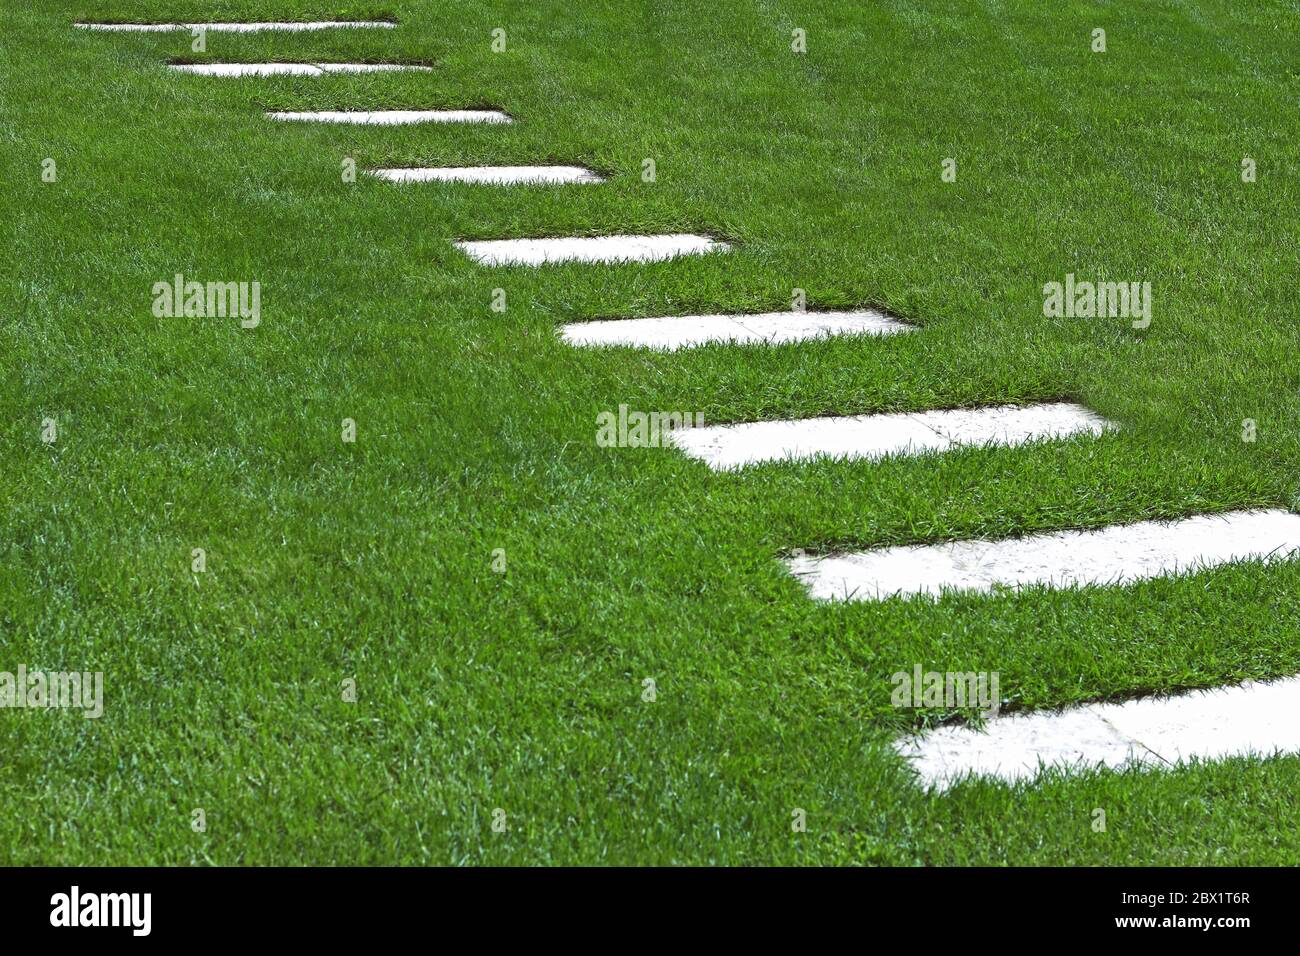 stepping stone in a green lawn, diagonal path Stock Photo